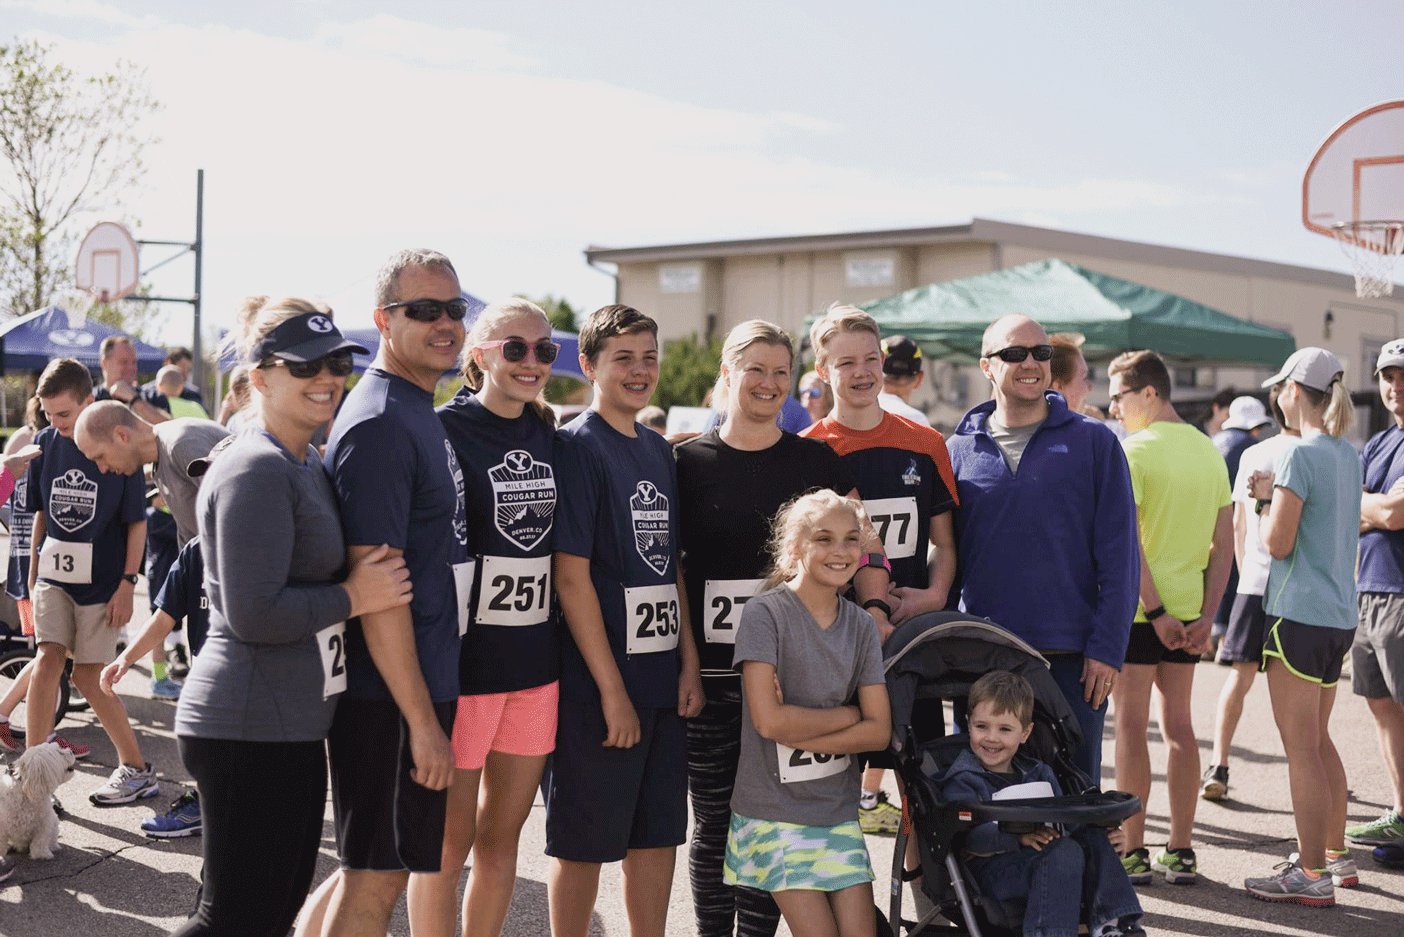 Alums and families gather at the Mile High Cougar run, many wearing matching race tees.